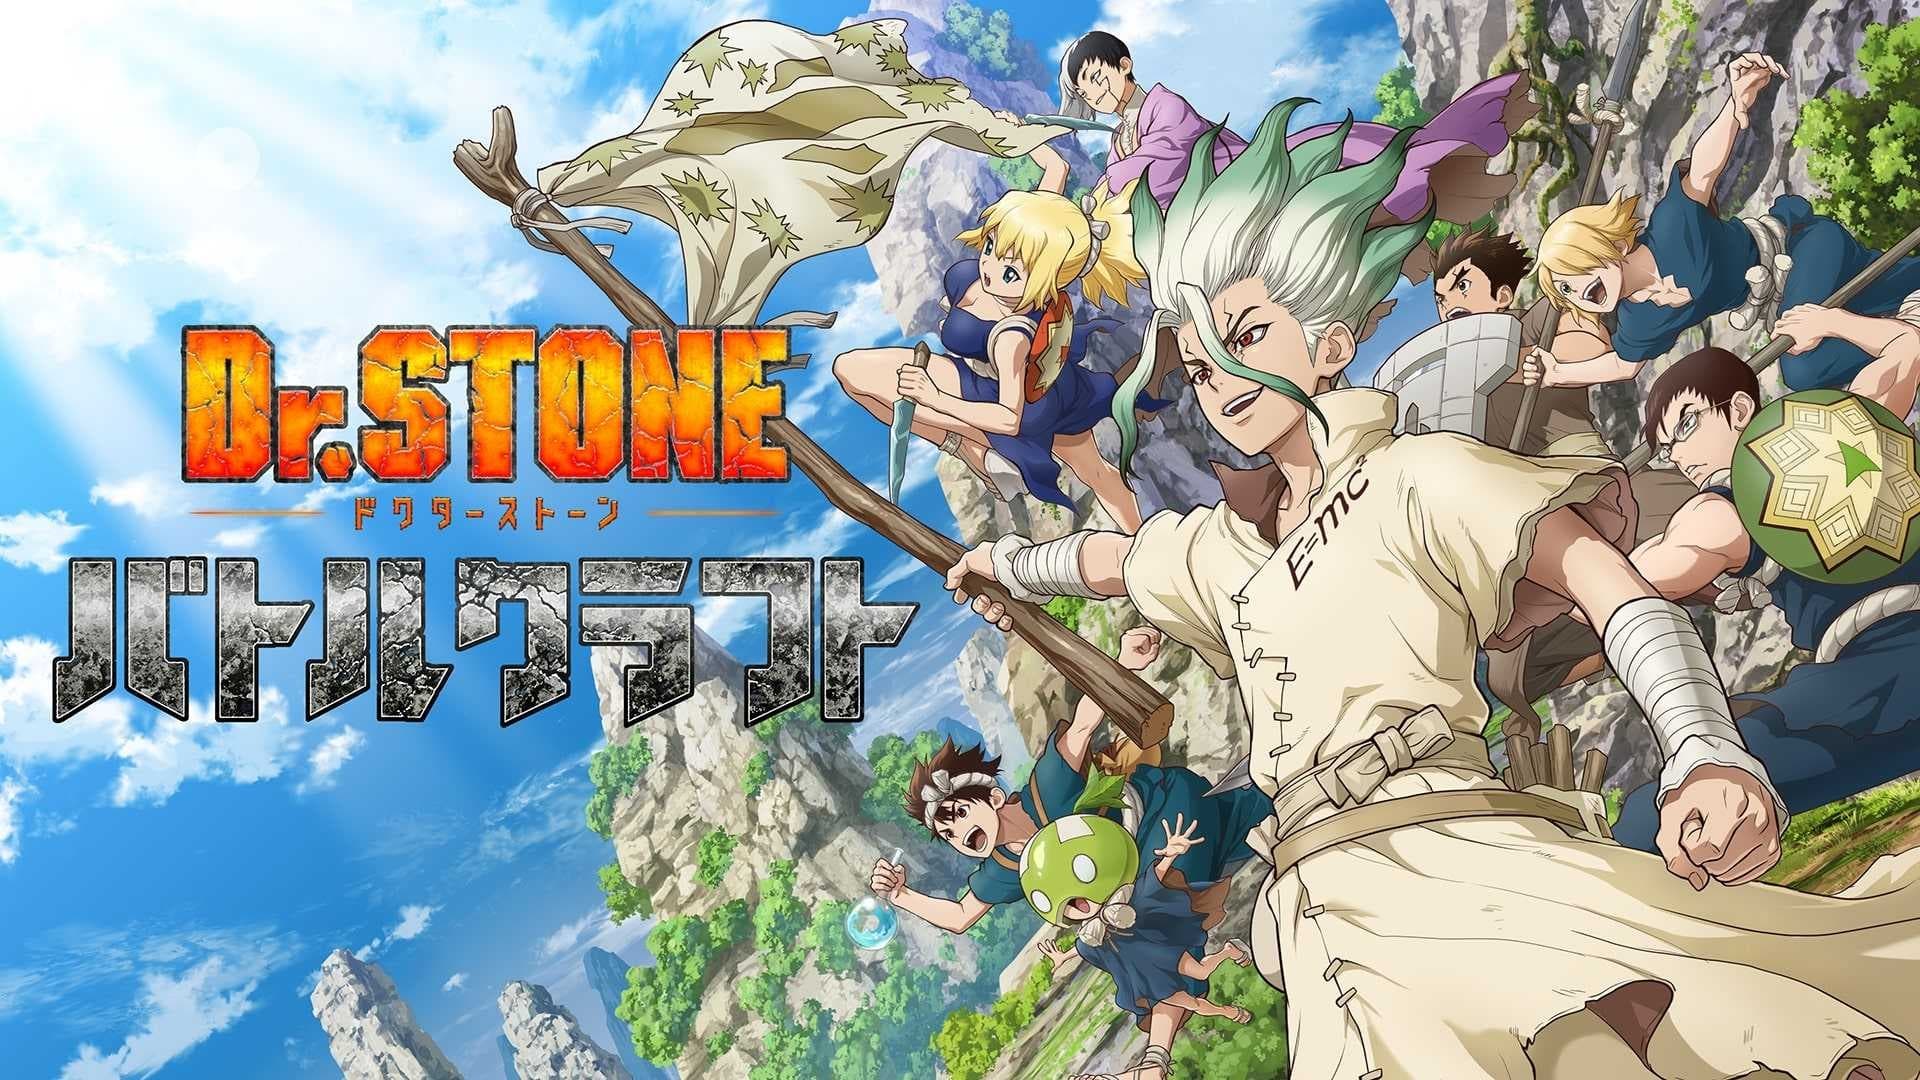 Dr Stone Season 3 What We Hope to See in the Sequel